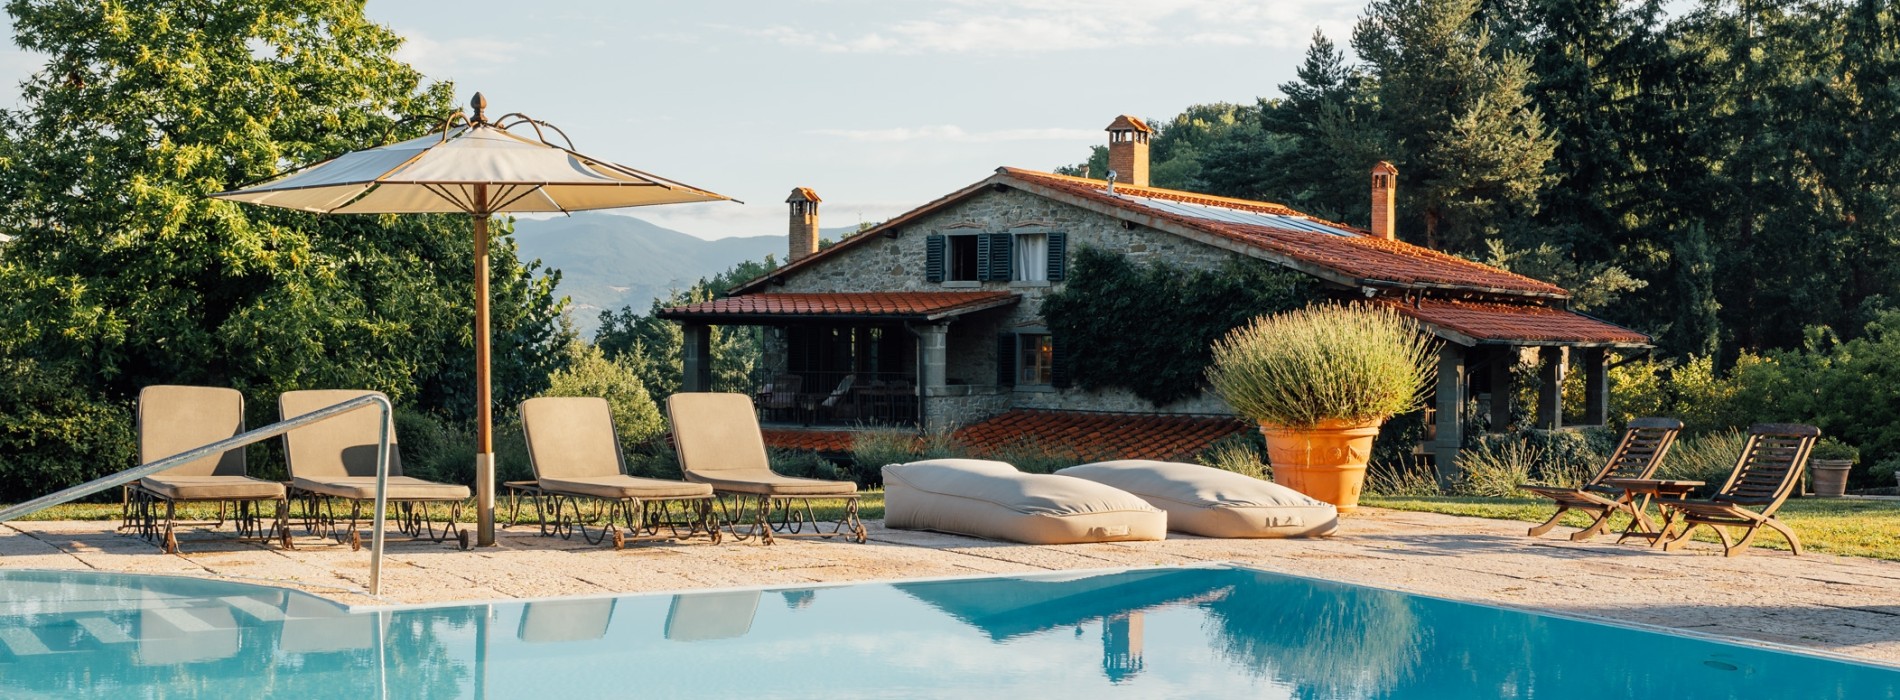 "Staying in a glorious villa in the Tuscan Countryside, cooking and having fun"